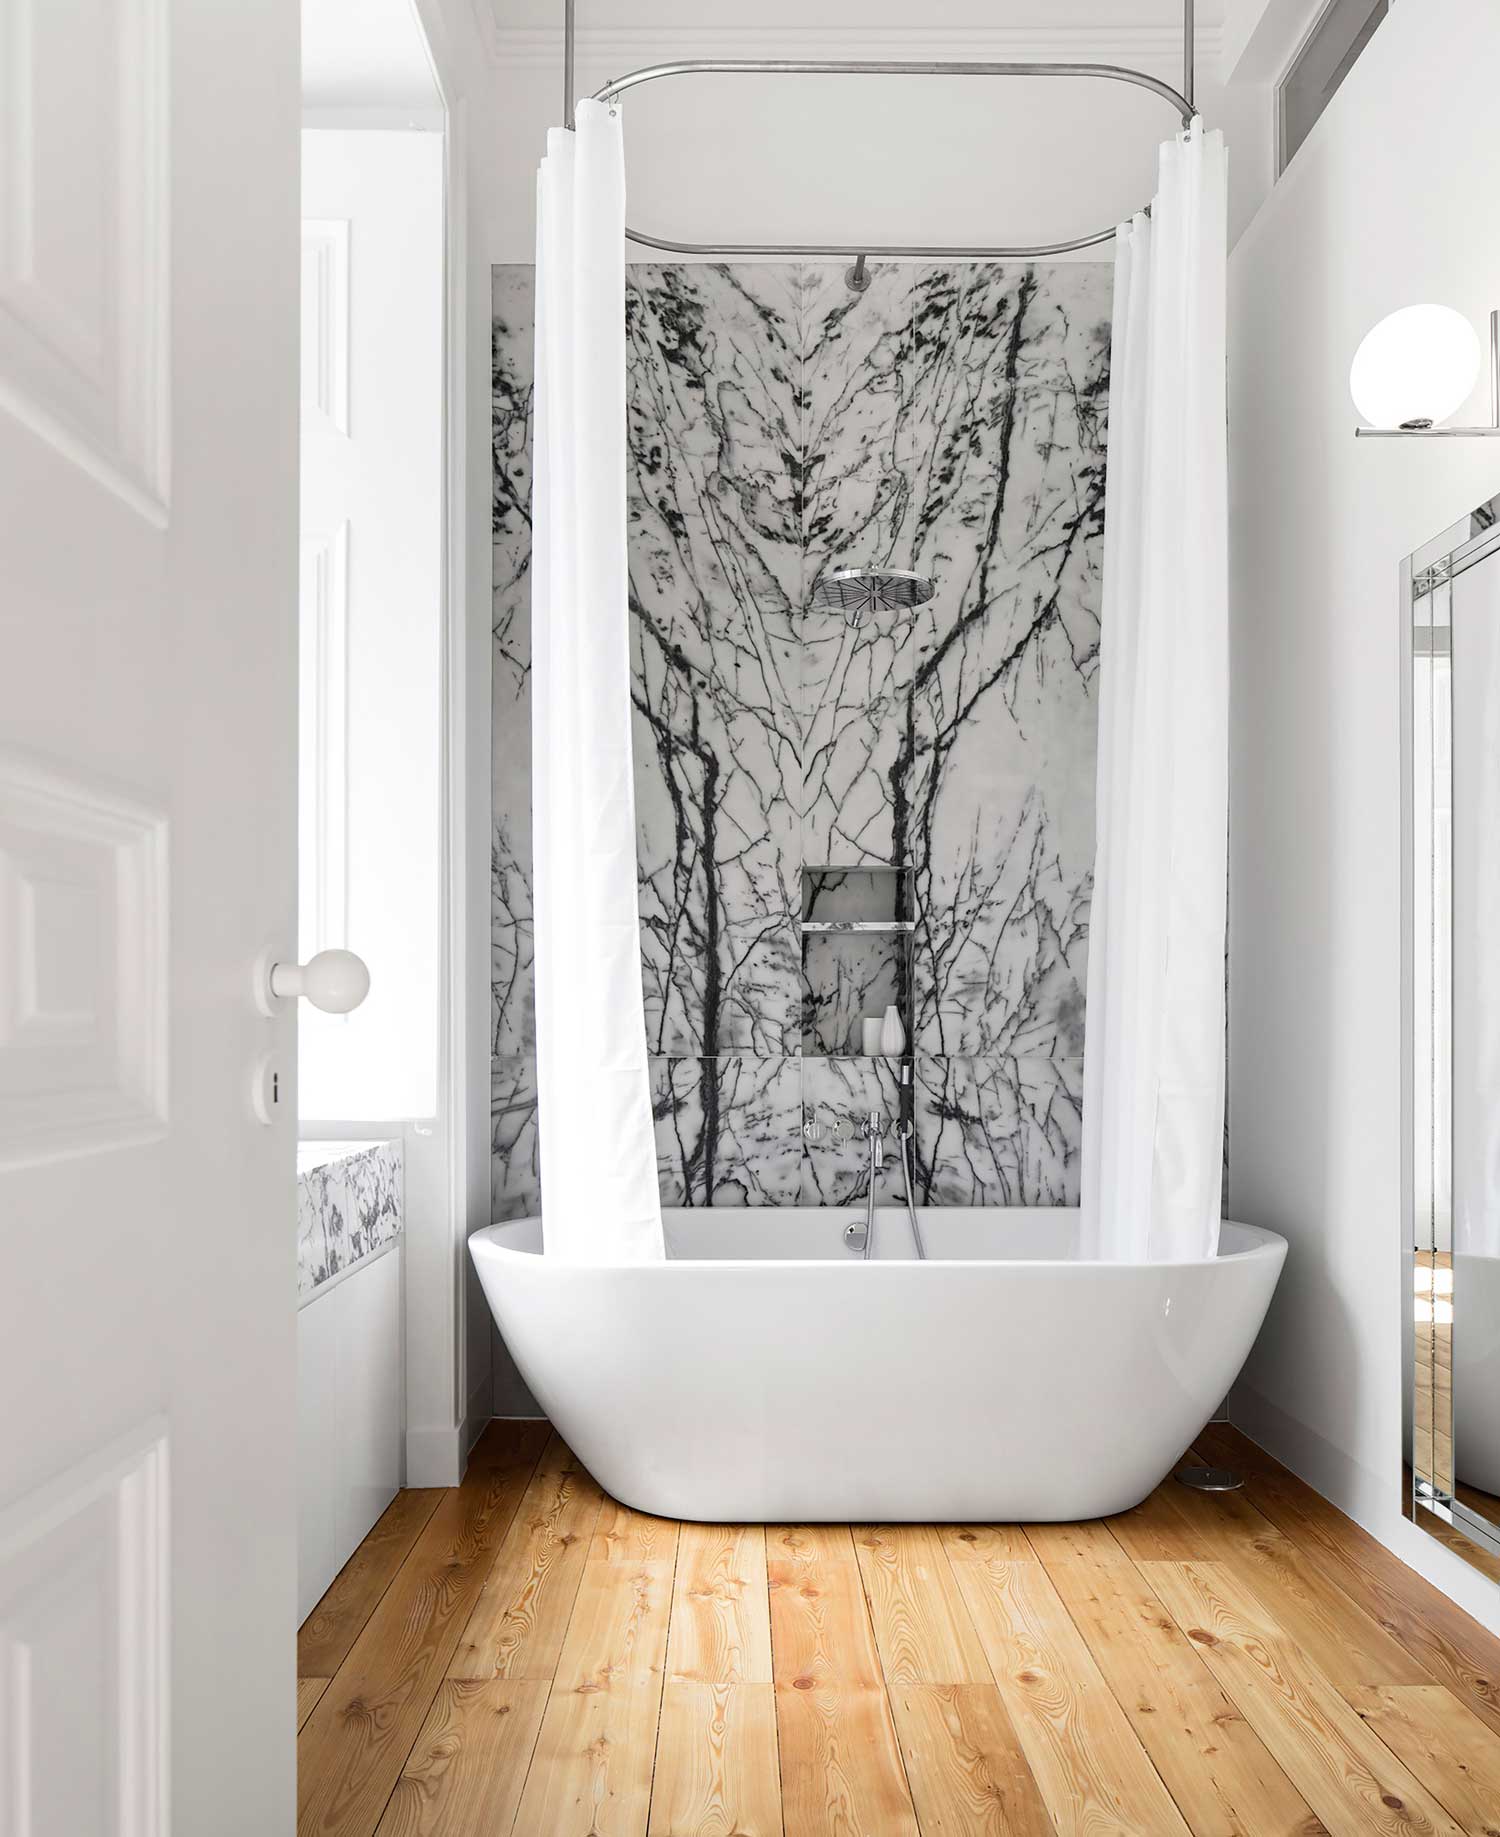 The bathroom catches an eye due to the use of Portuguese marble and a warm colored wooden floor